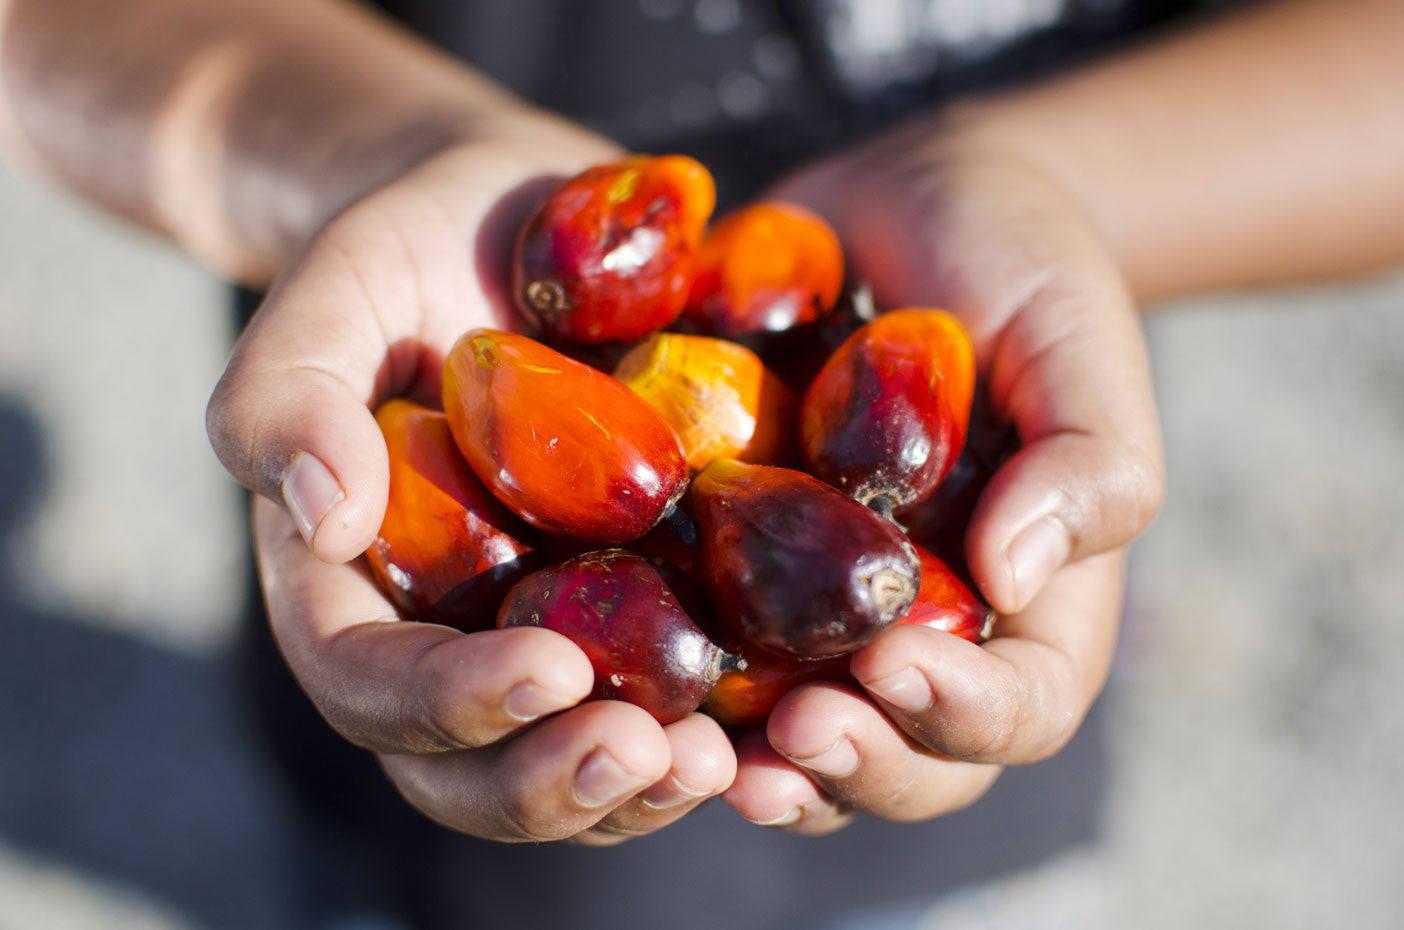 6 Ways to Avoid Palm Oil (and Why You Should)